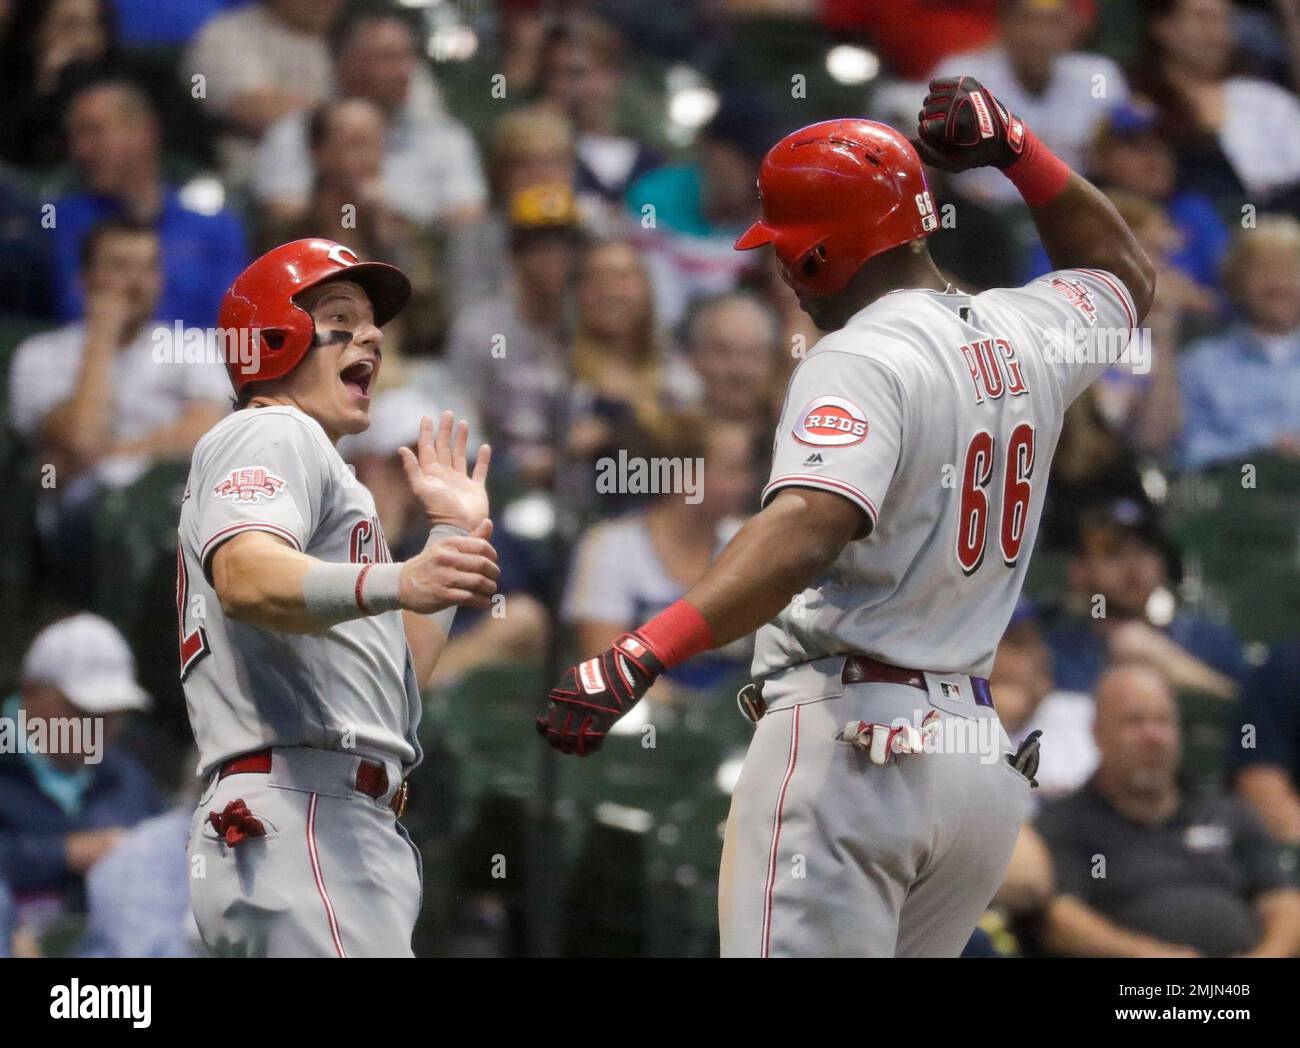 From Derek Dietrich and Yasiel Puig, long home runs and a sense of